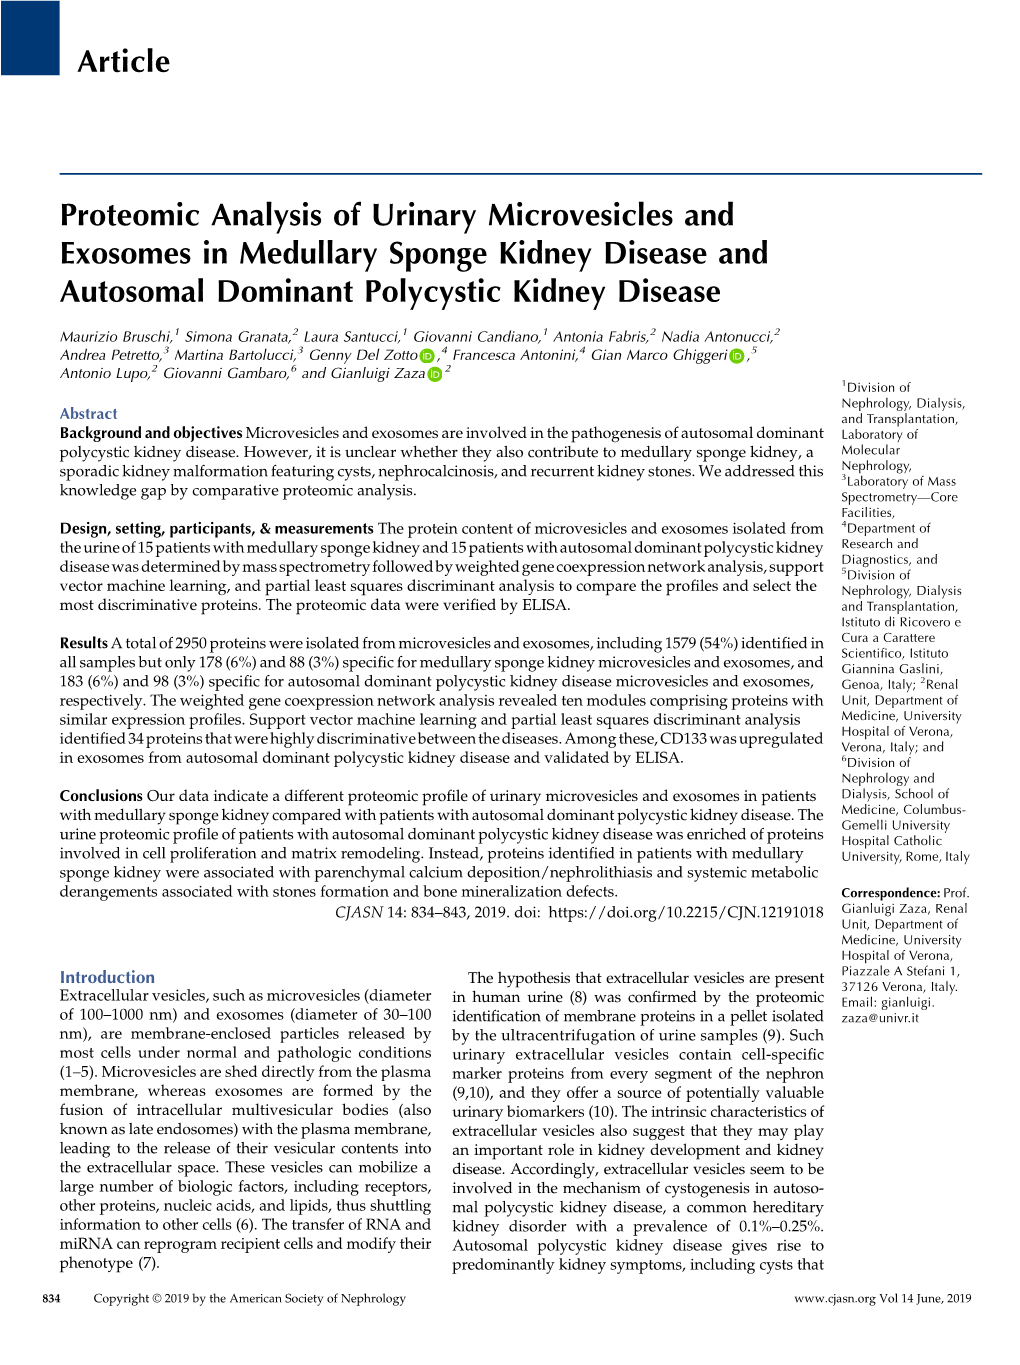 Article Proteomic Analysis of Urinary Microvesicles and Exosomes In